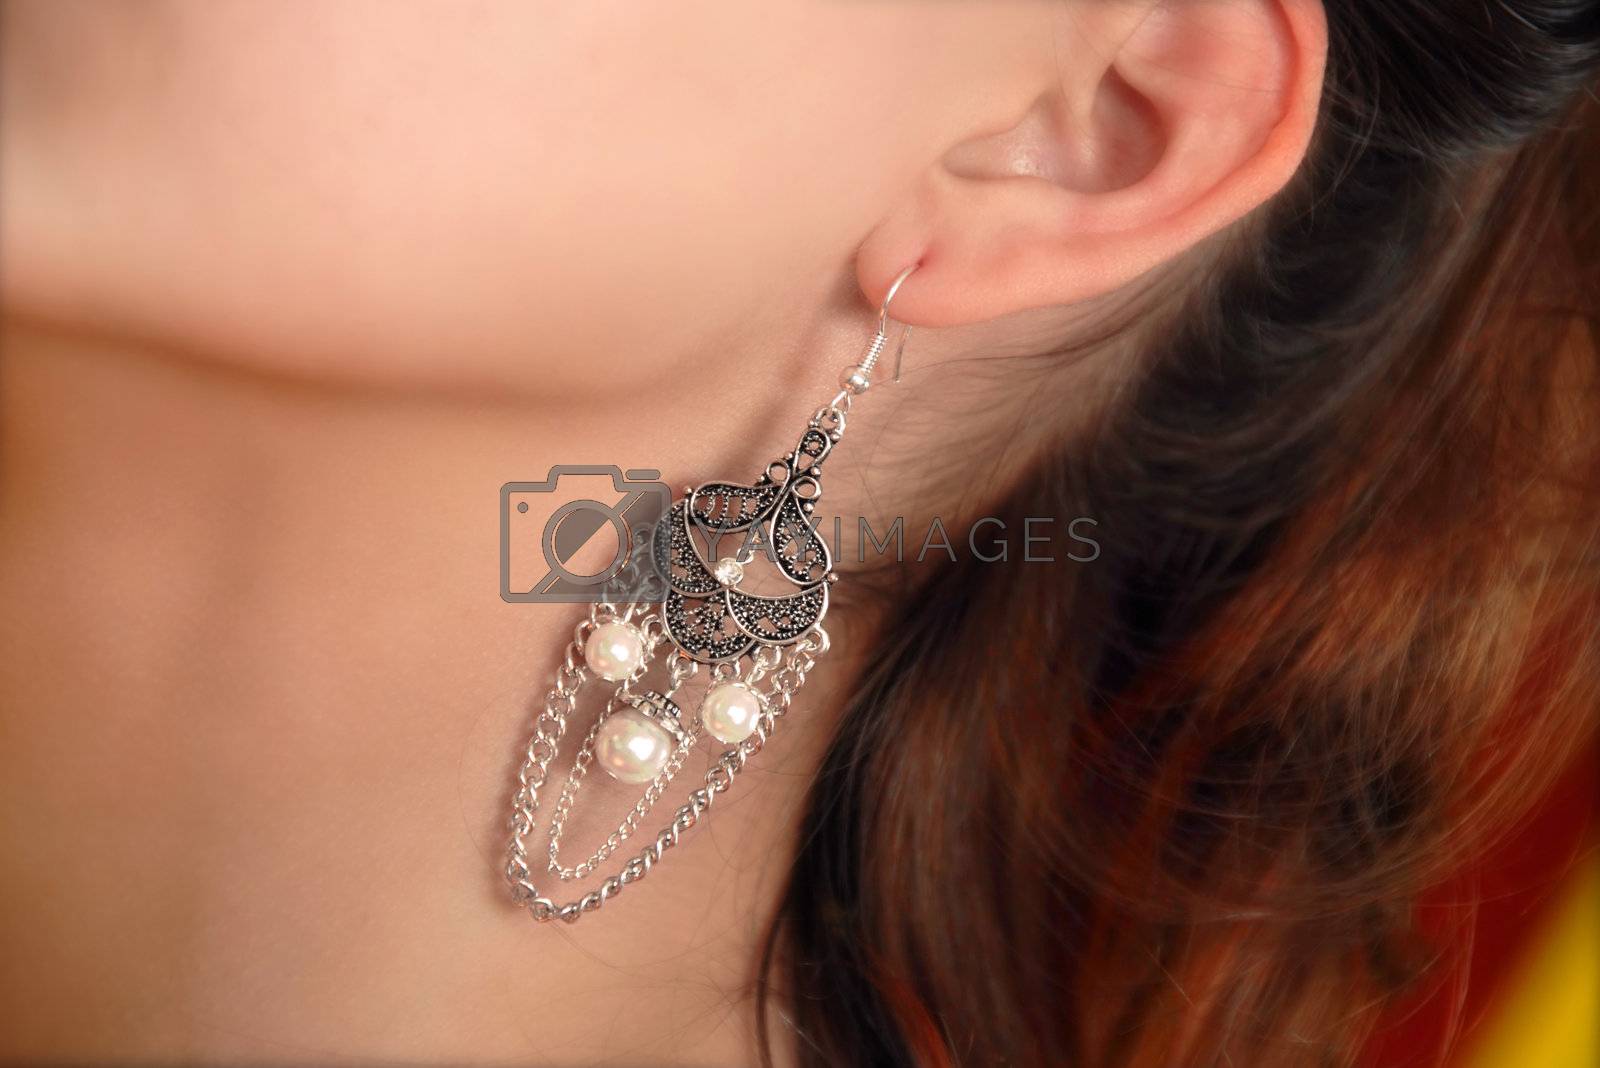 Royalty free image of earring by simply